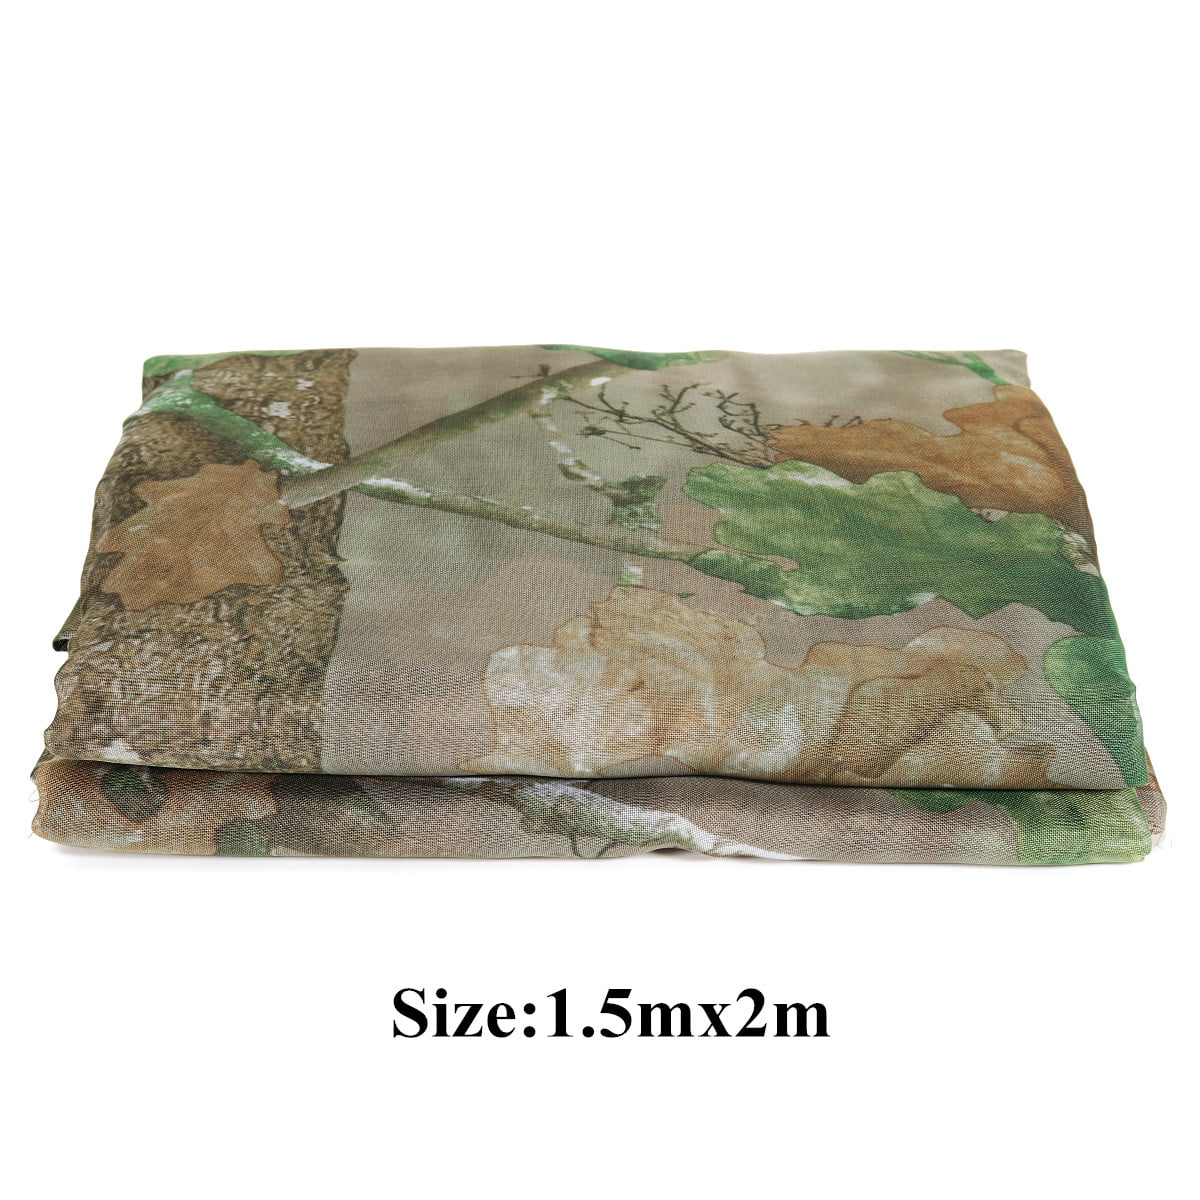 Clear View Camo Army Net Hide Netting Pigeon Cover Hunting Shooting Woodland USA 